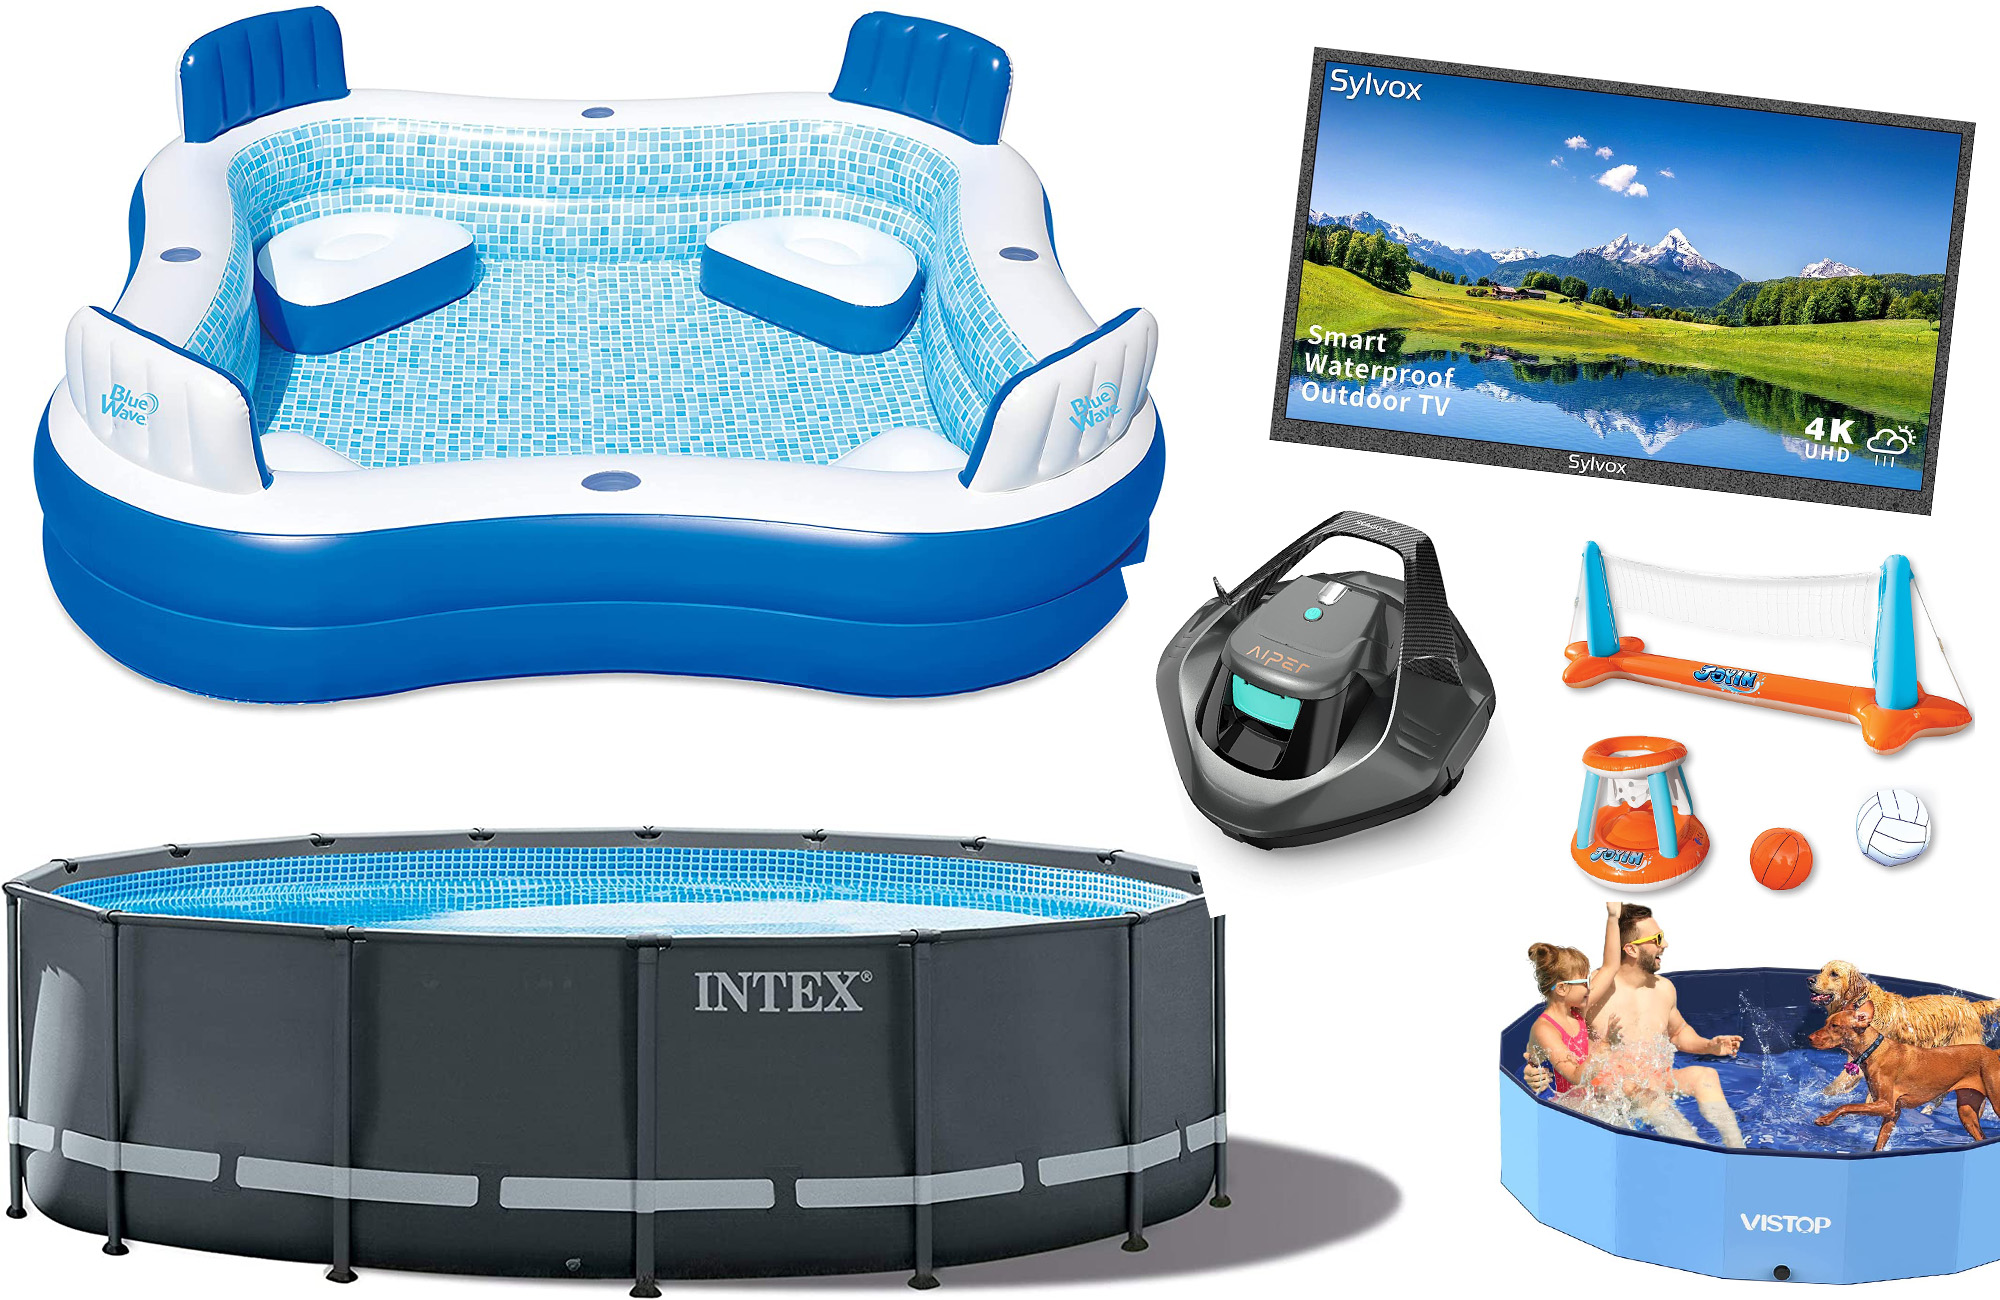 Splurge on a pool or other summer upgrades with these last-minute Prime Day deals